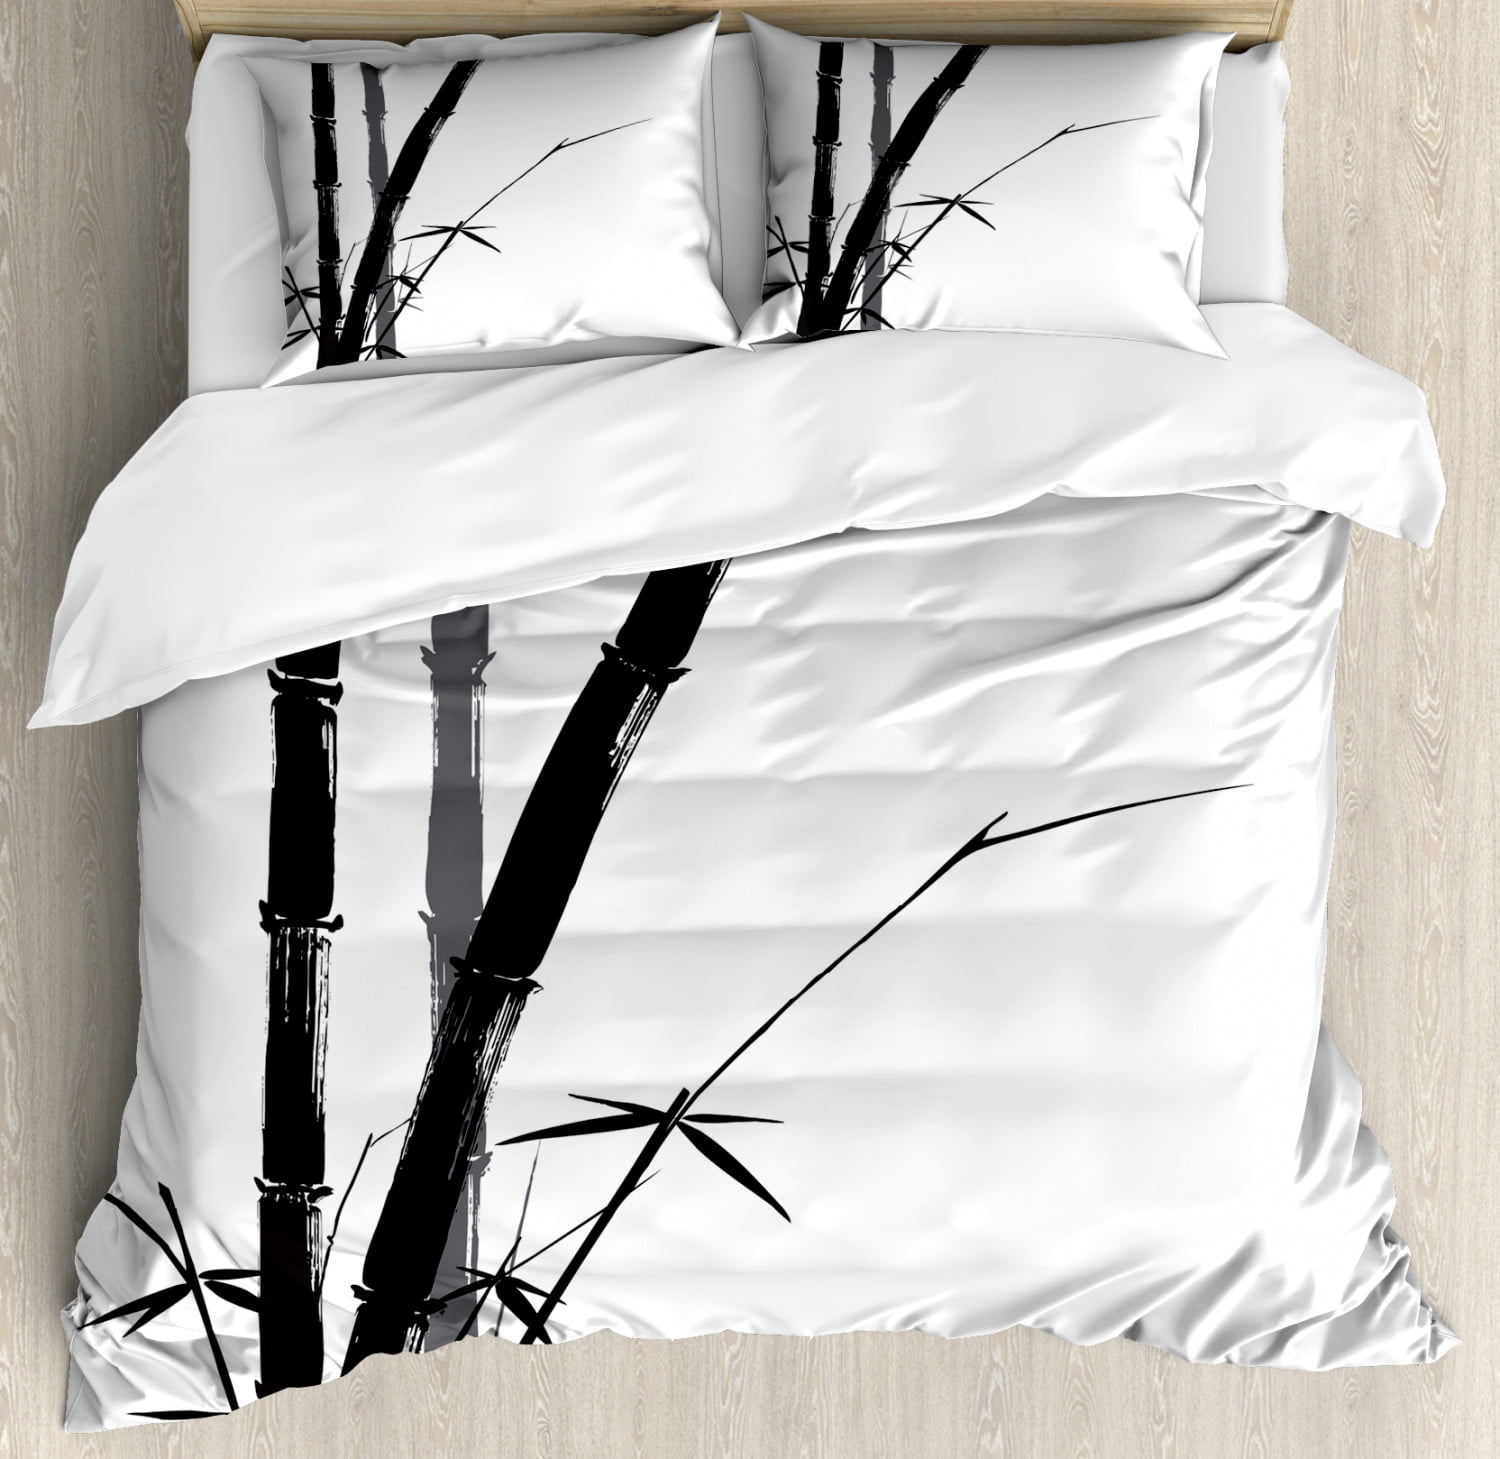 Ambesonne Bamboo Duvet Cover Set King Size Charcoal Grey White Bamboo Tree Illustration Traditional Chinese Calligraphy Style Asian Culture Decorative 3 Piece Bedding Set with 2 Pillow Shams